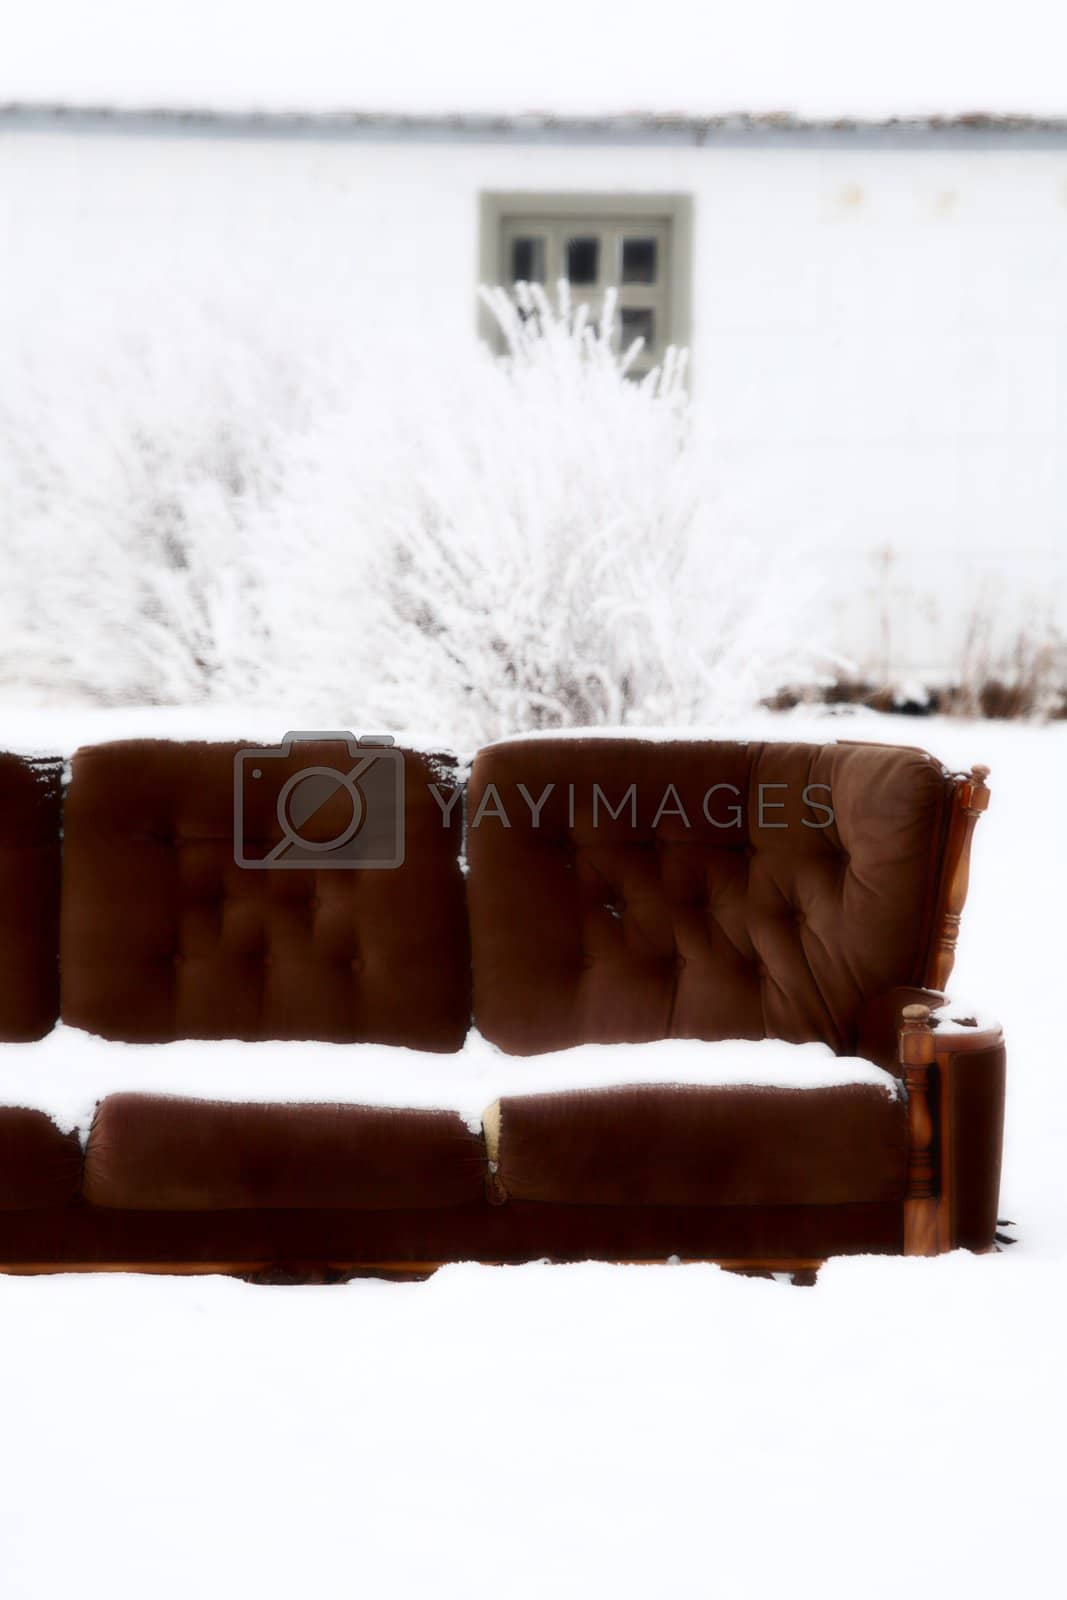 Royalty free image of Snow covered couch outside town house by pictureguy